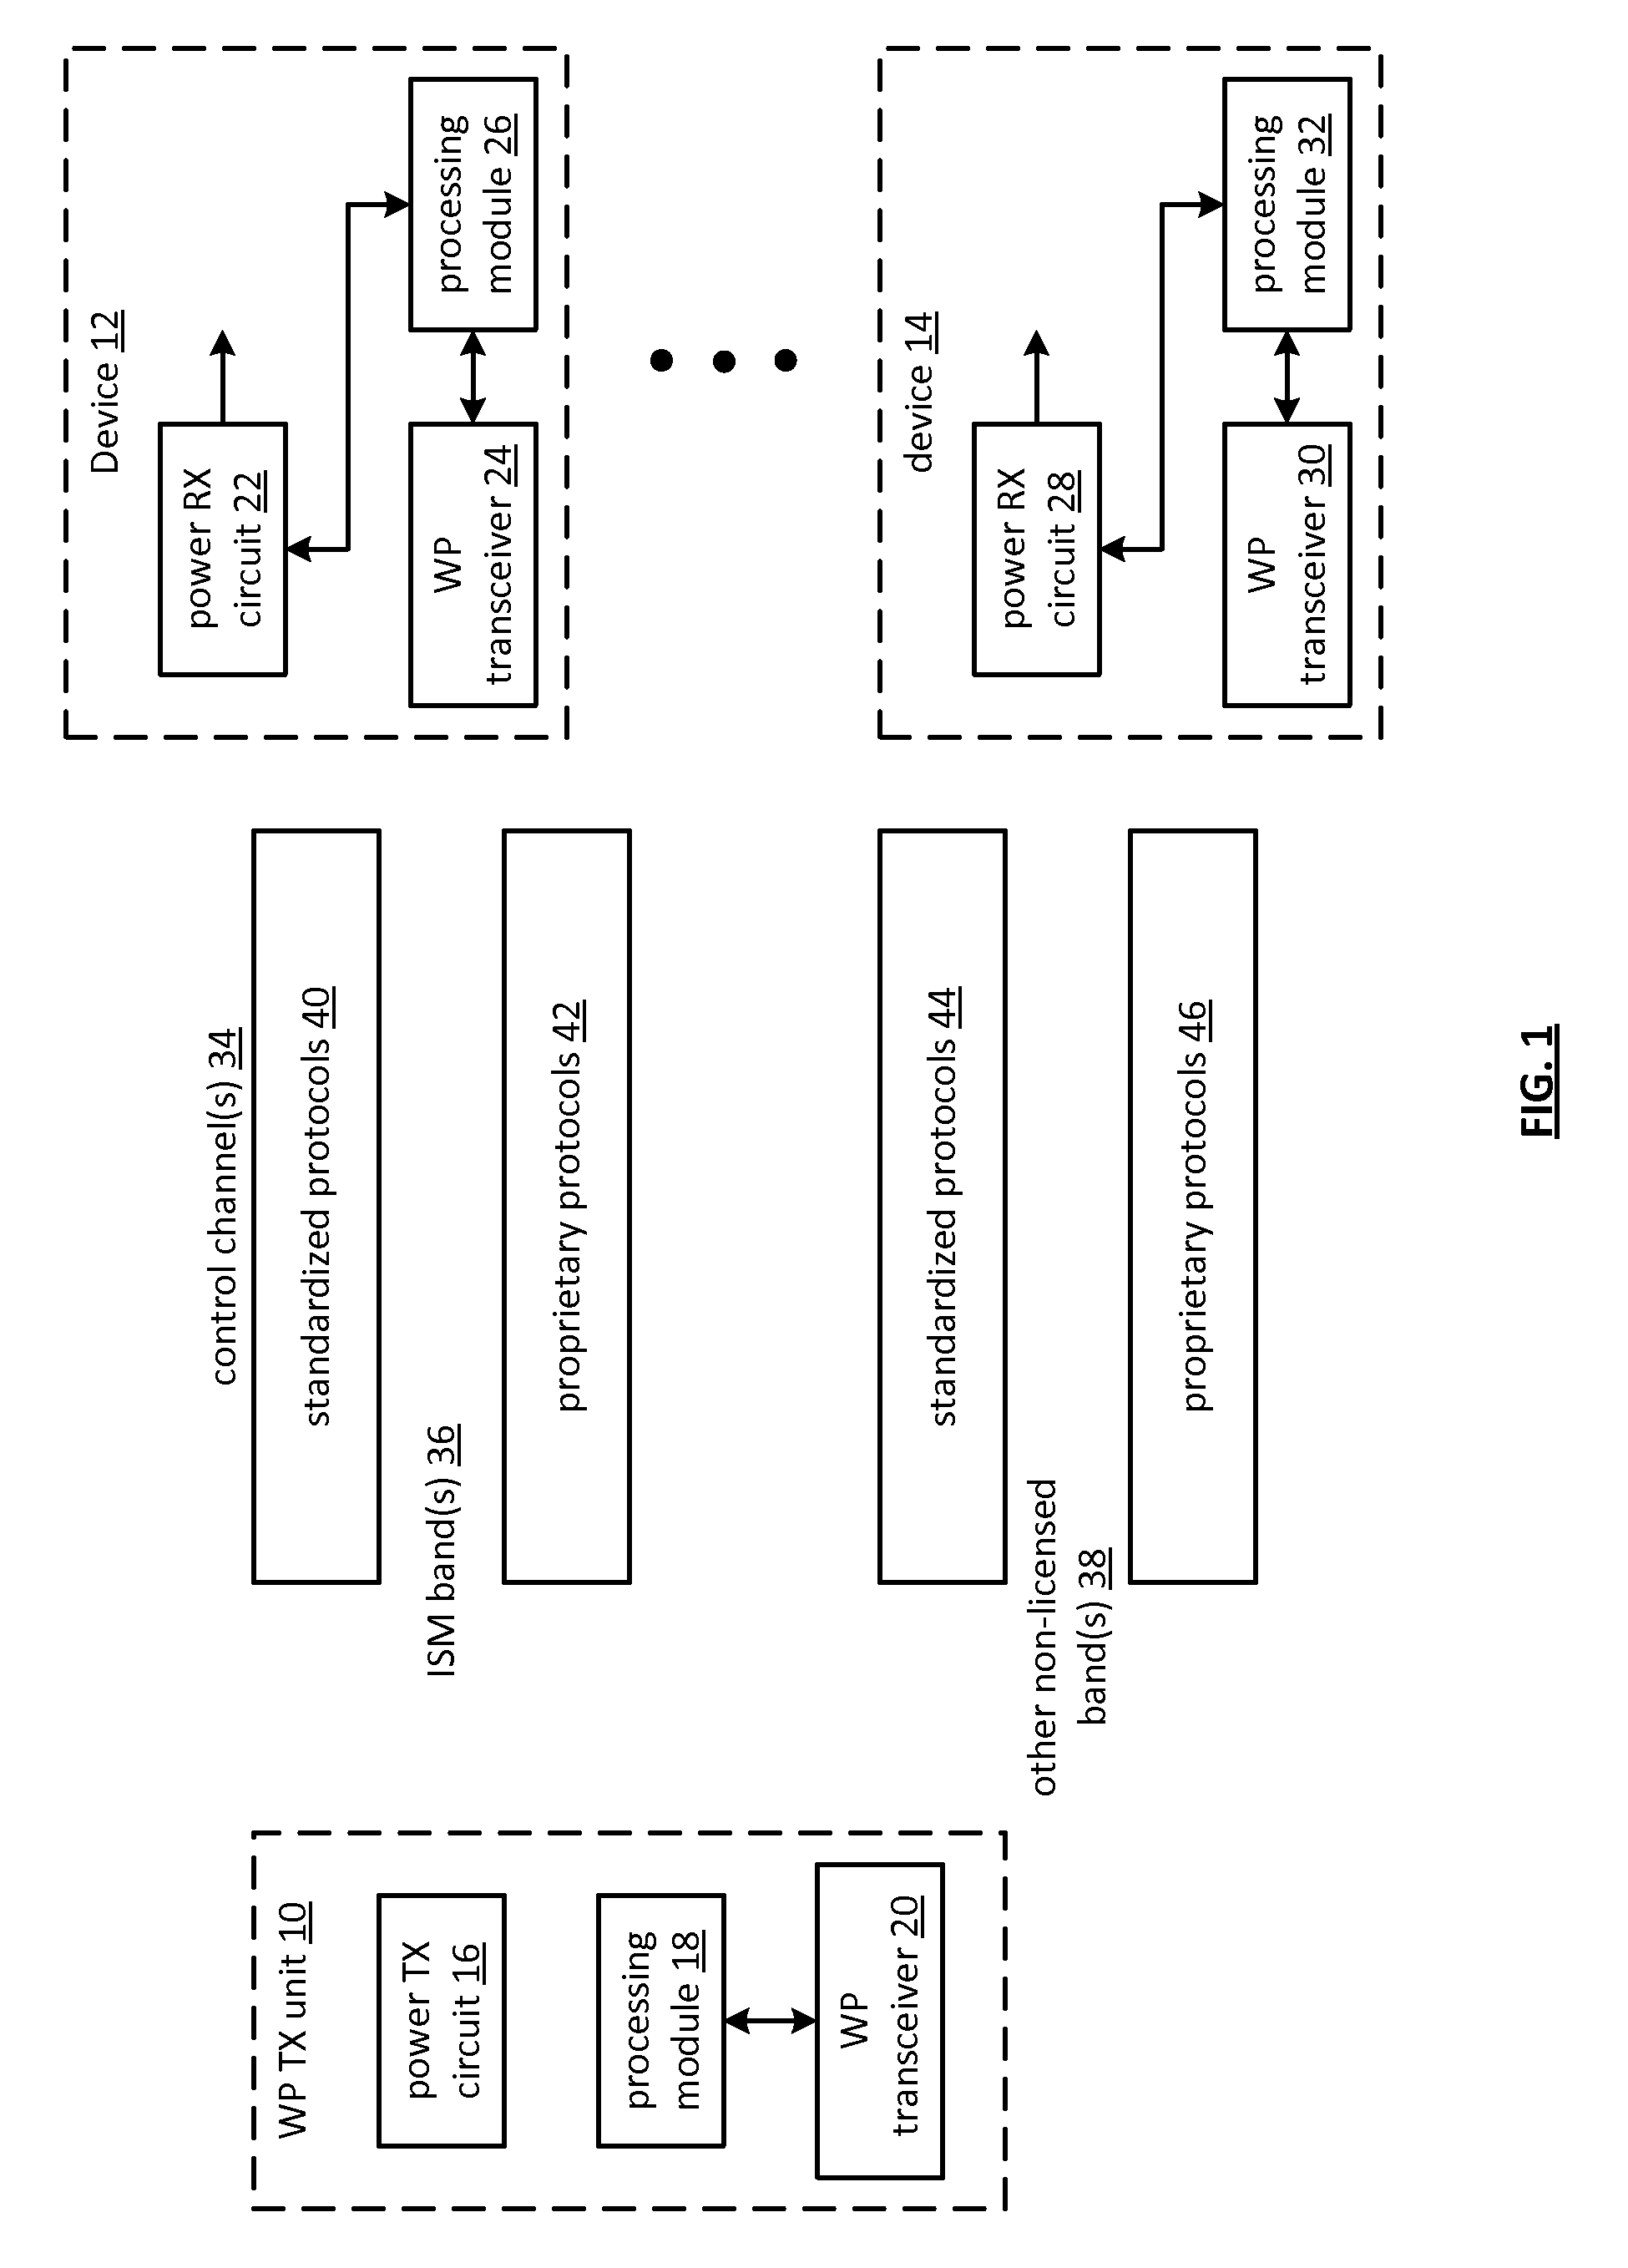 IC controlled wireless power operation and applications thereof